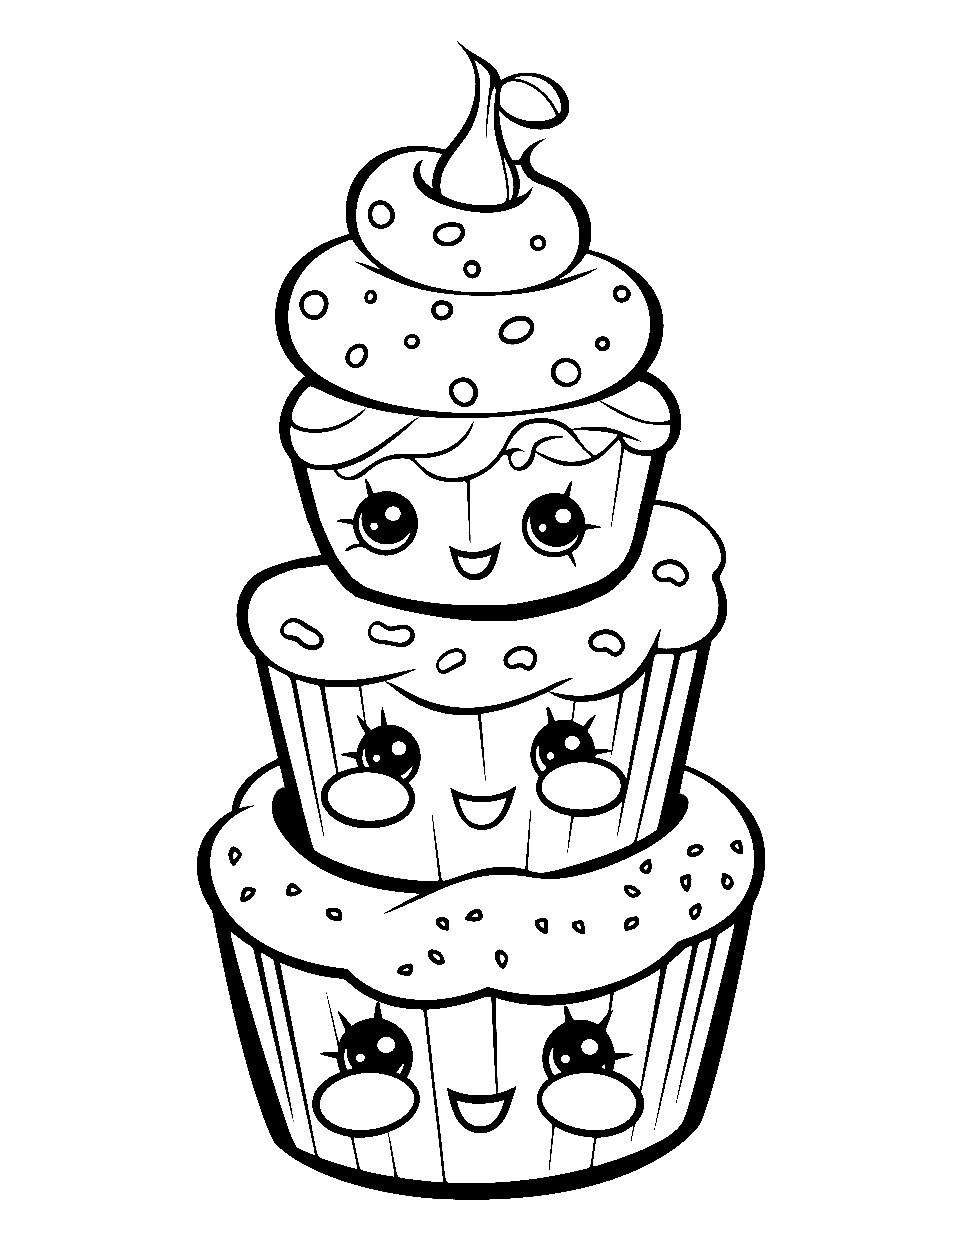 Shopkins coloring pages free printable sheets